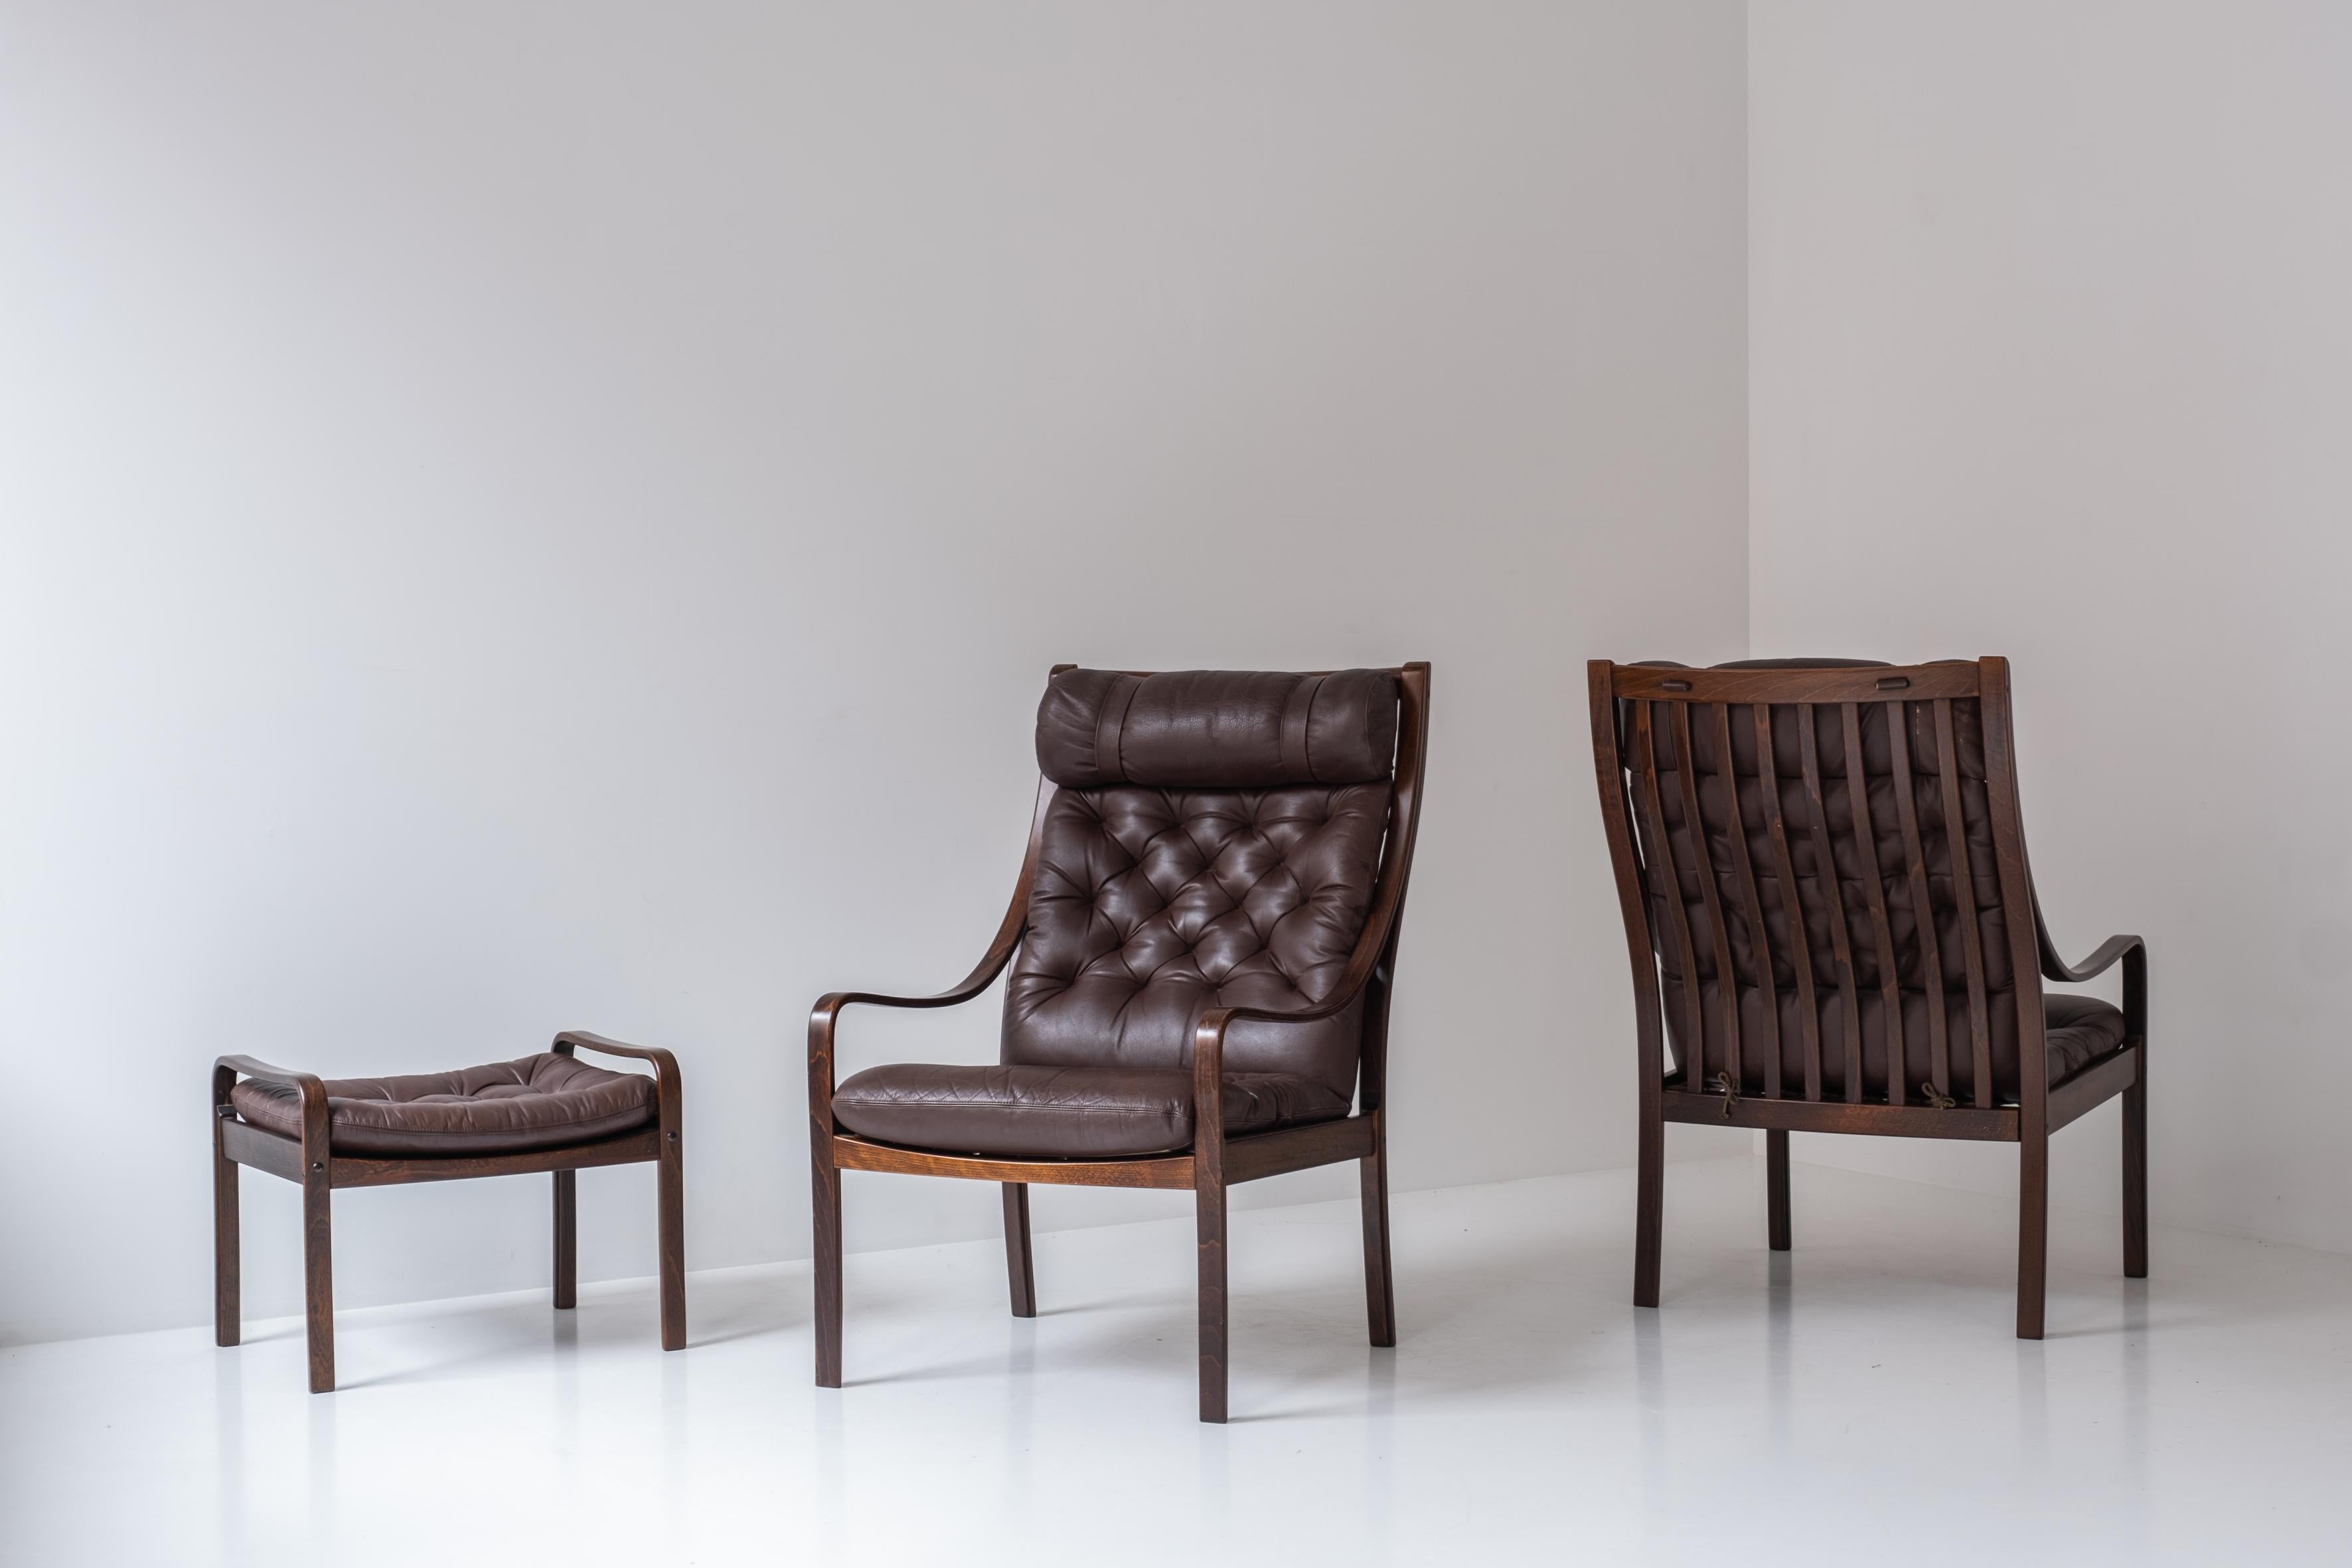 Rare set armchairs and ottoman by Fredrik A. Kayser for Vatne Möbler, Norway 1960s. This set consists of two armchairs and one ottoman. This seating group features a brown leather upholstery and a stained elmwood frame, creating a sophisticated and